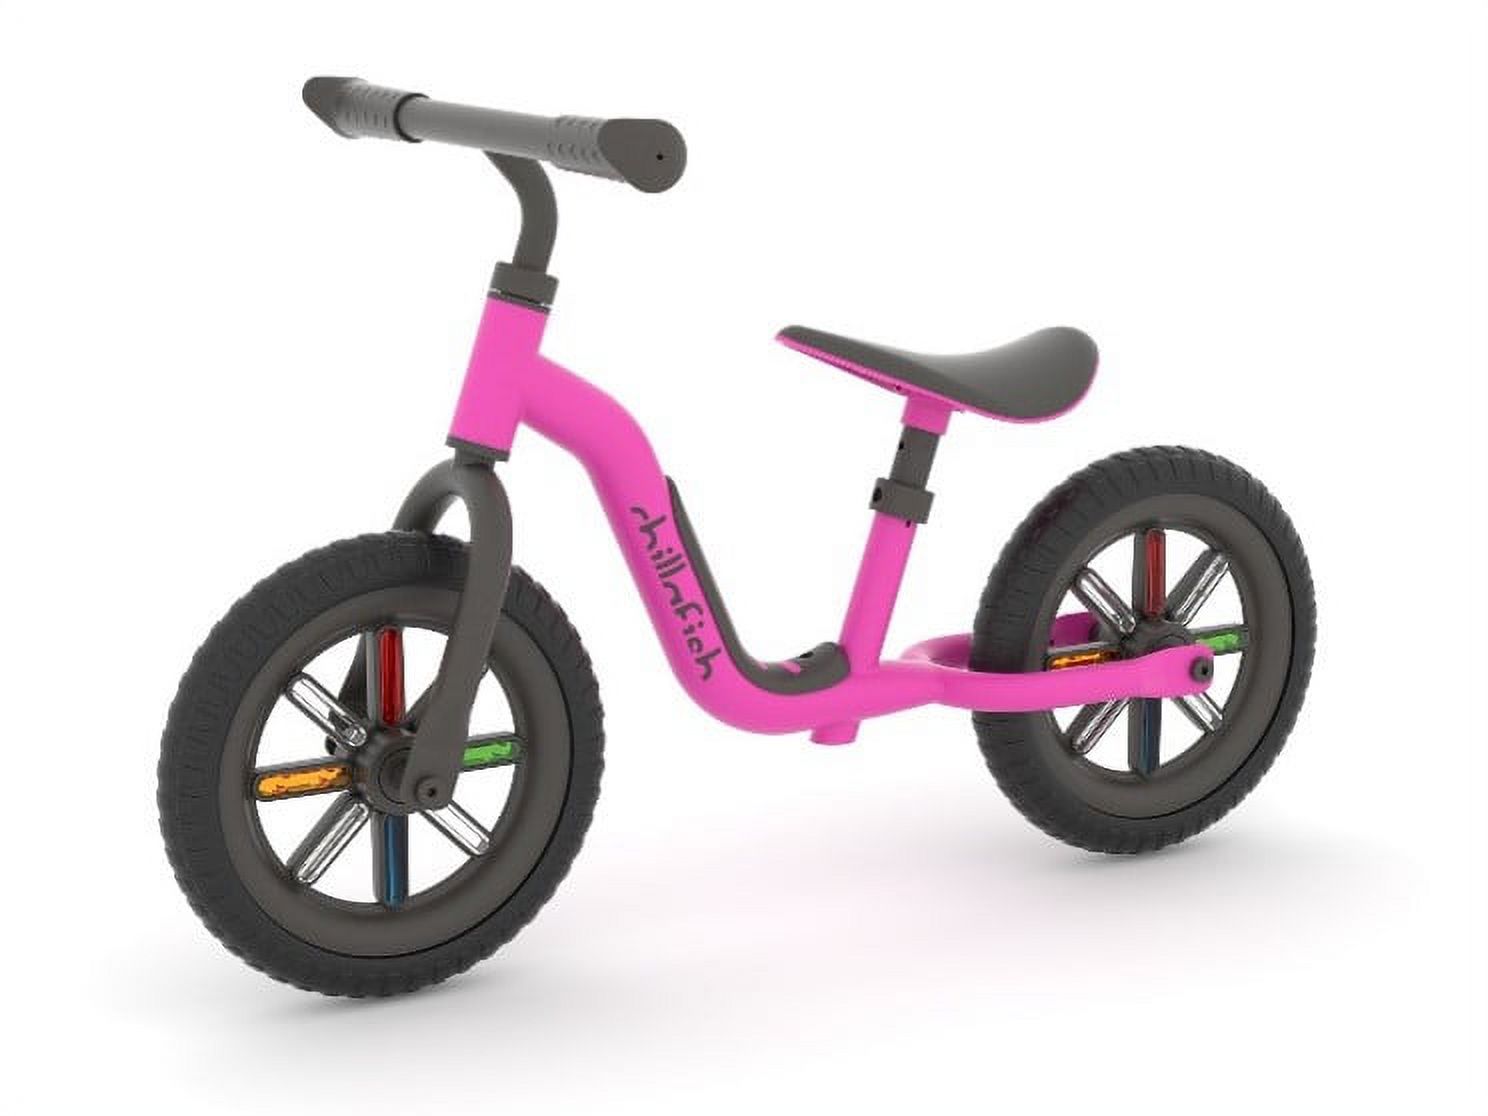 Chillafish Buzzi 10' Balance Bike for Kids 1.5 years and older, Lightweight Toddler Bike with Adjustable Seat - image 1 of 13